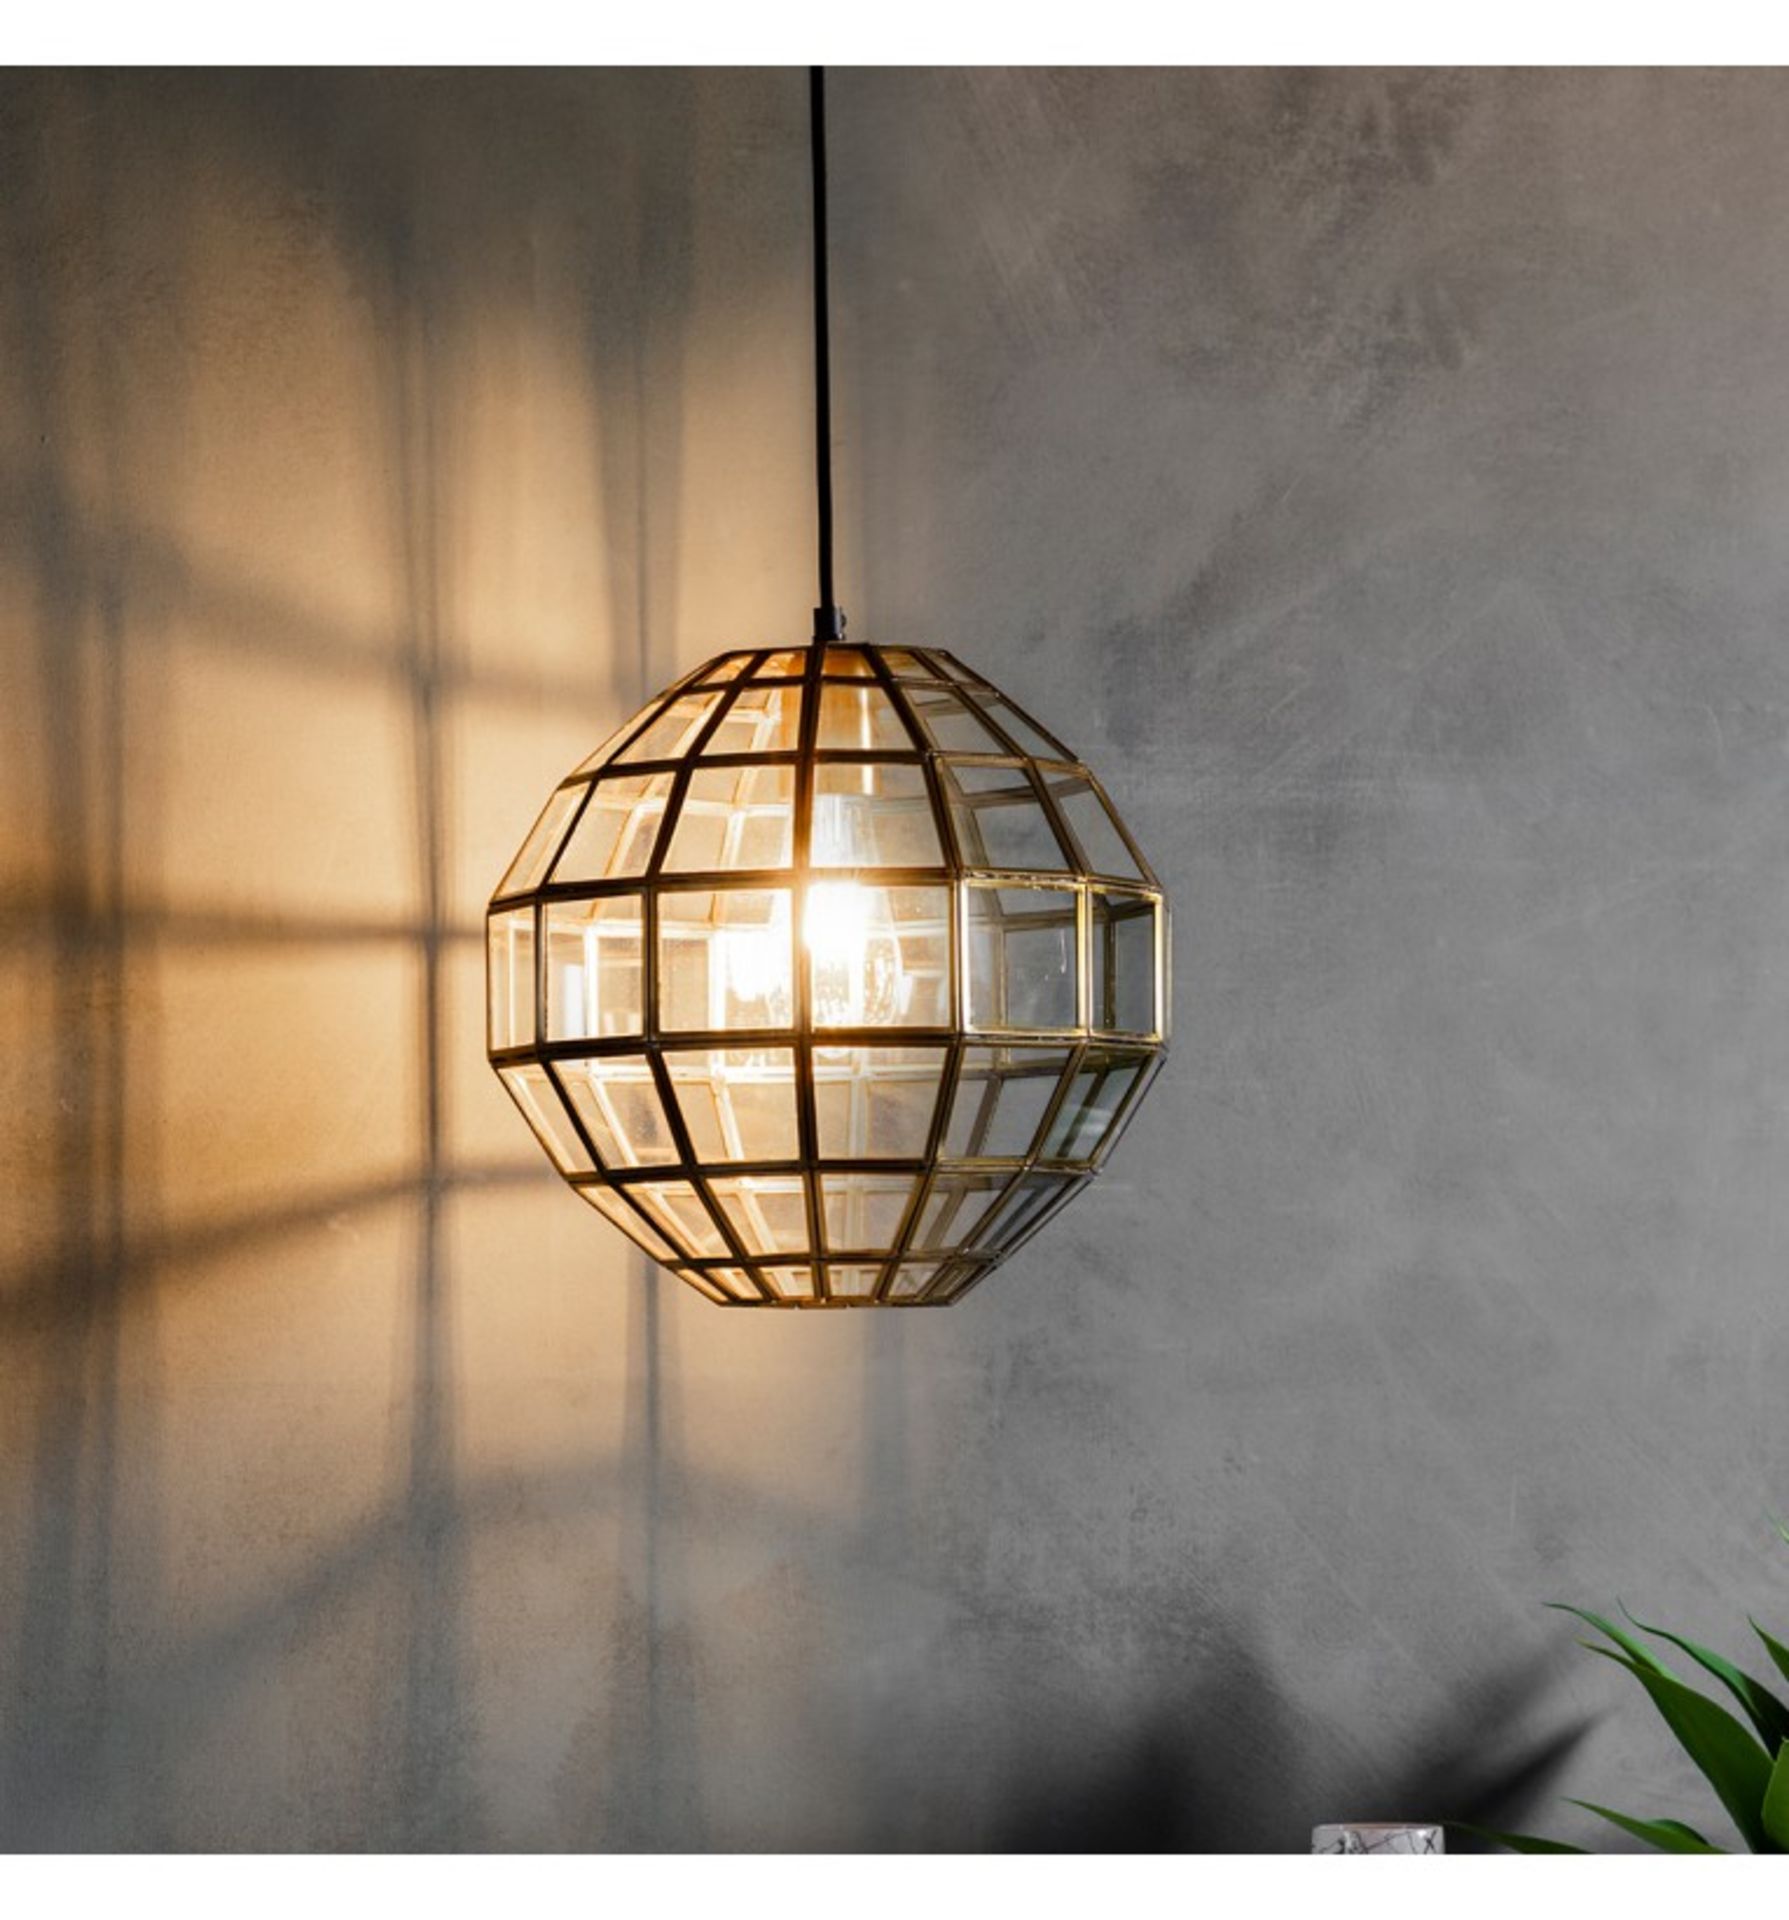 Matteo Pendant Lamp Add some light to your room with this disco ball style glass pendant lamp.